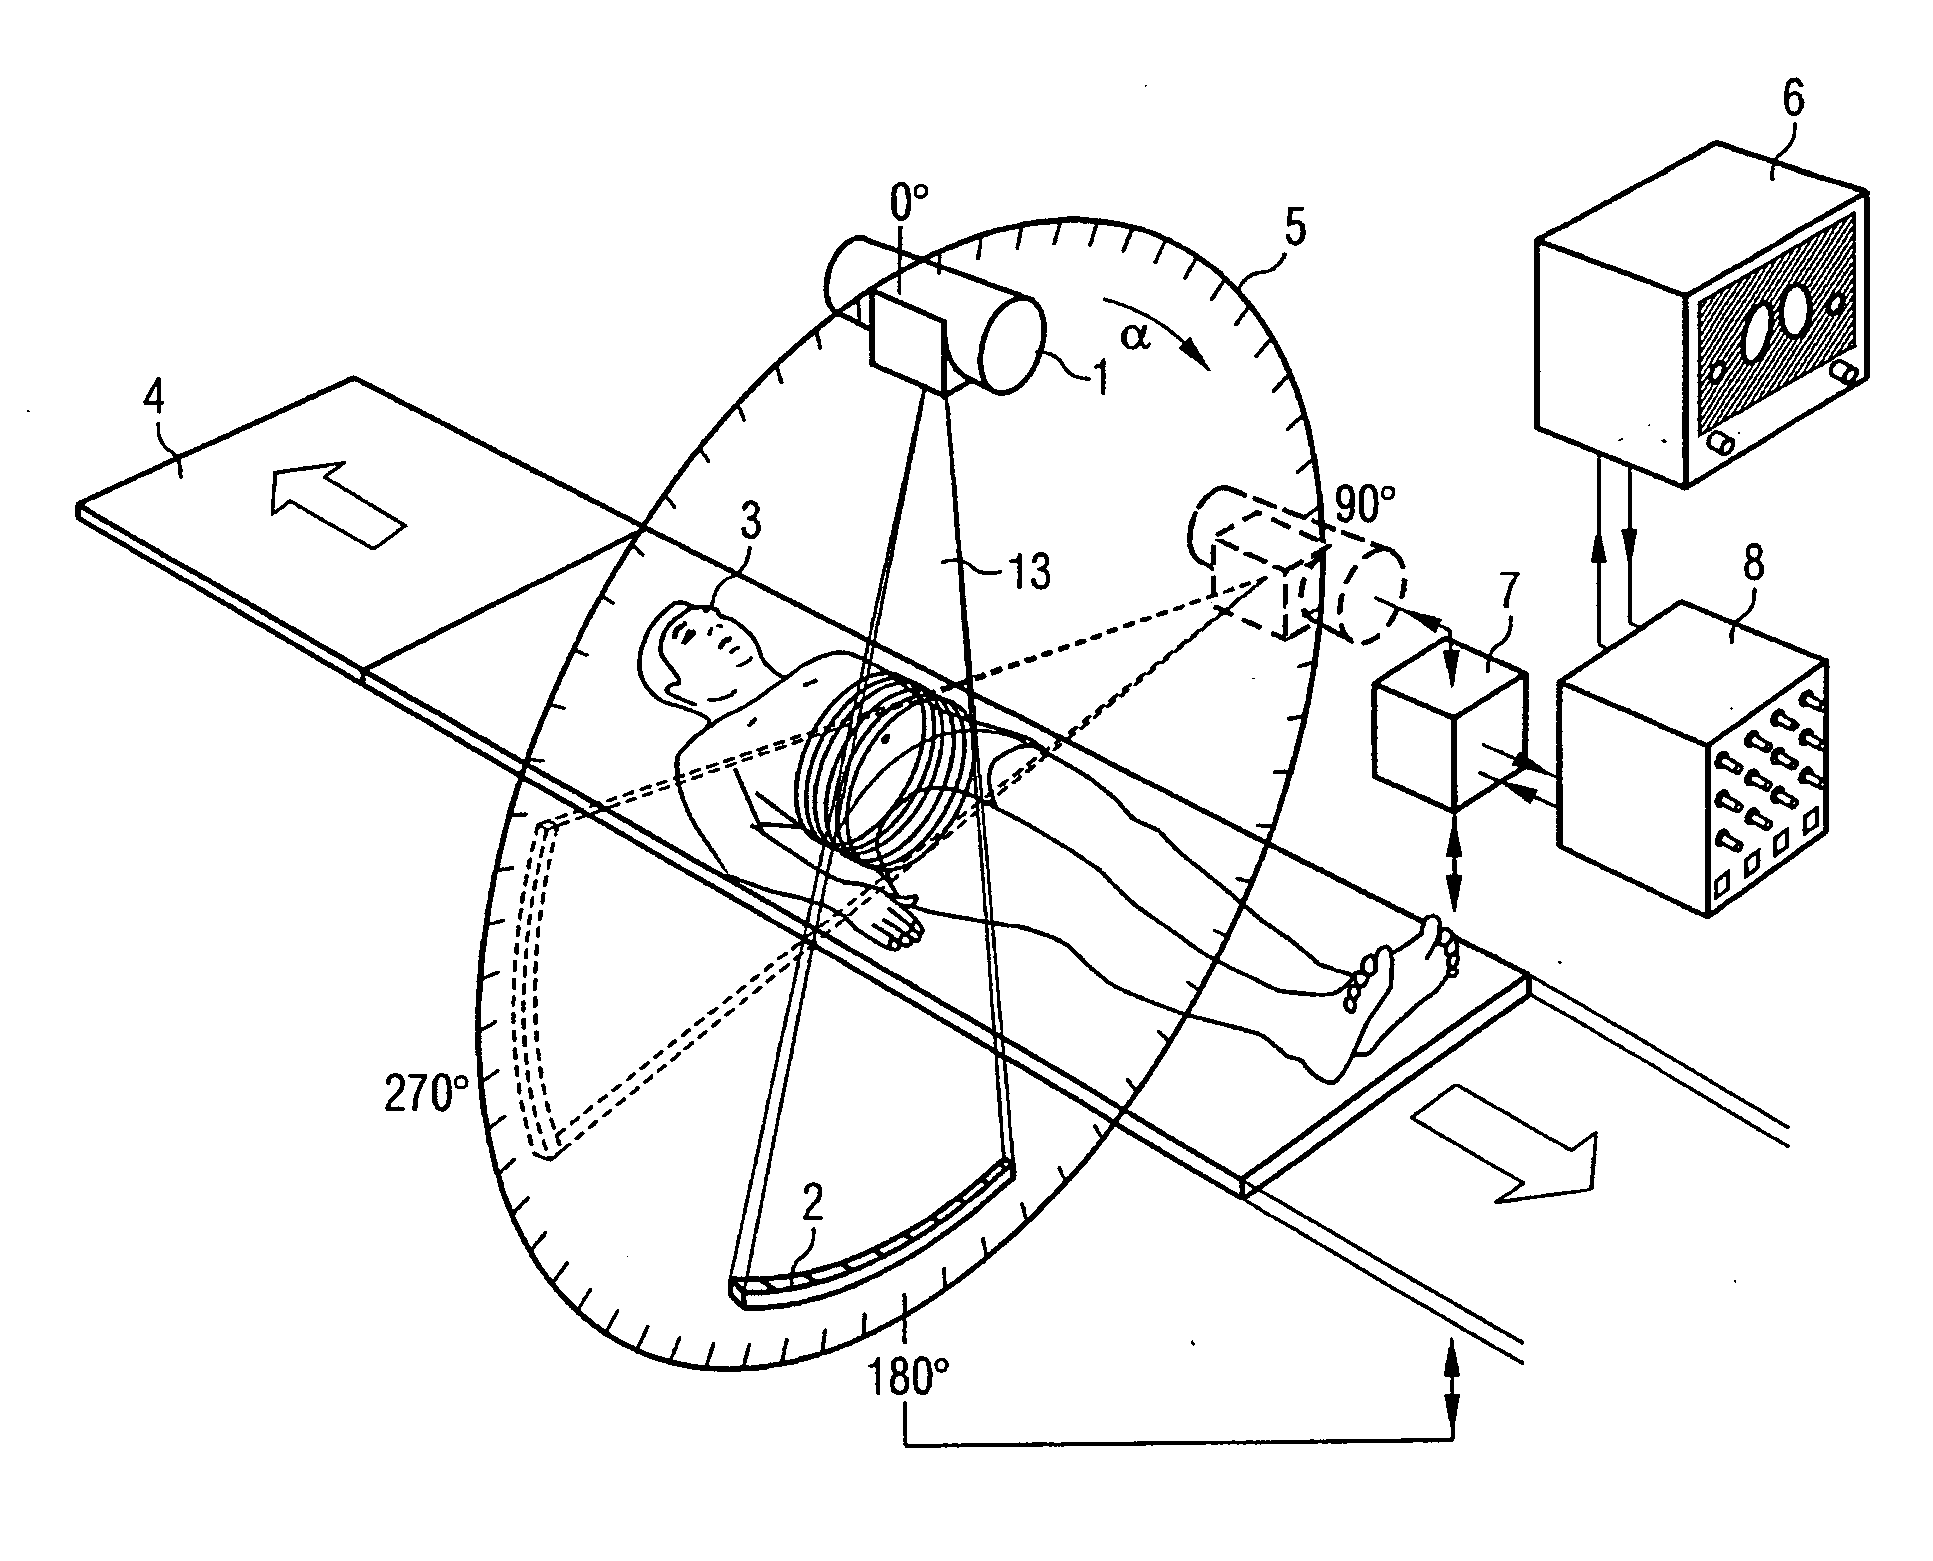 Computed tomography device with active adaptation of the measuring electronics